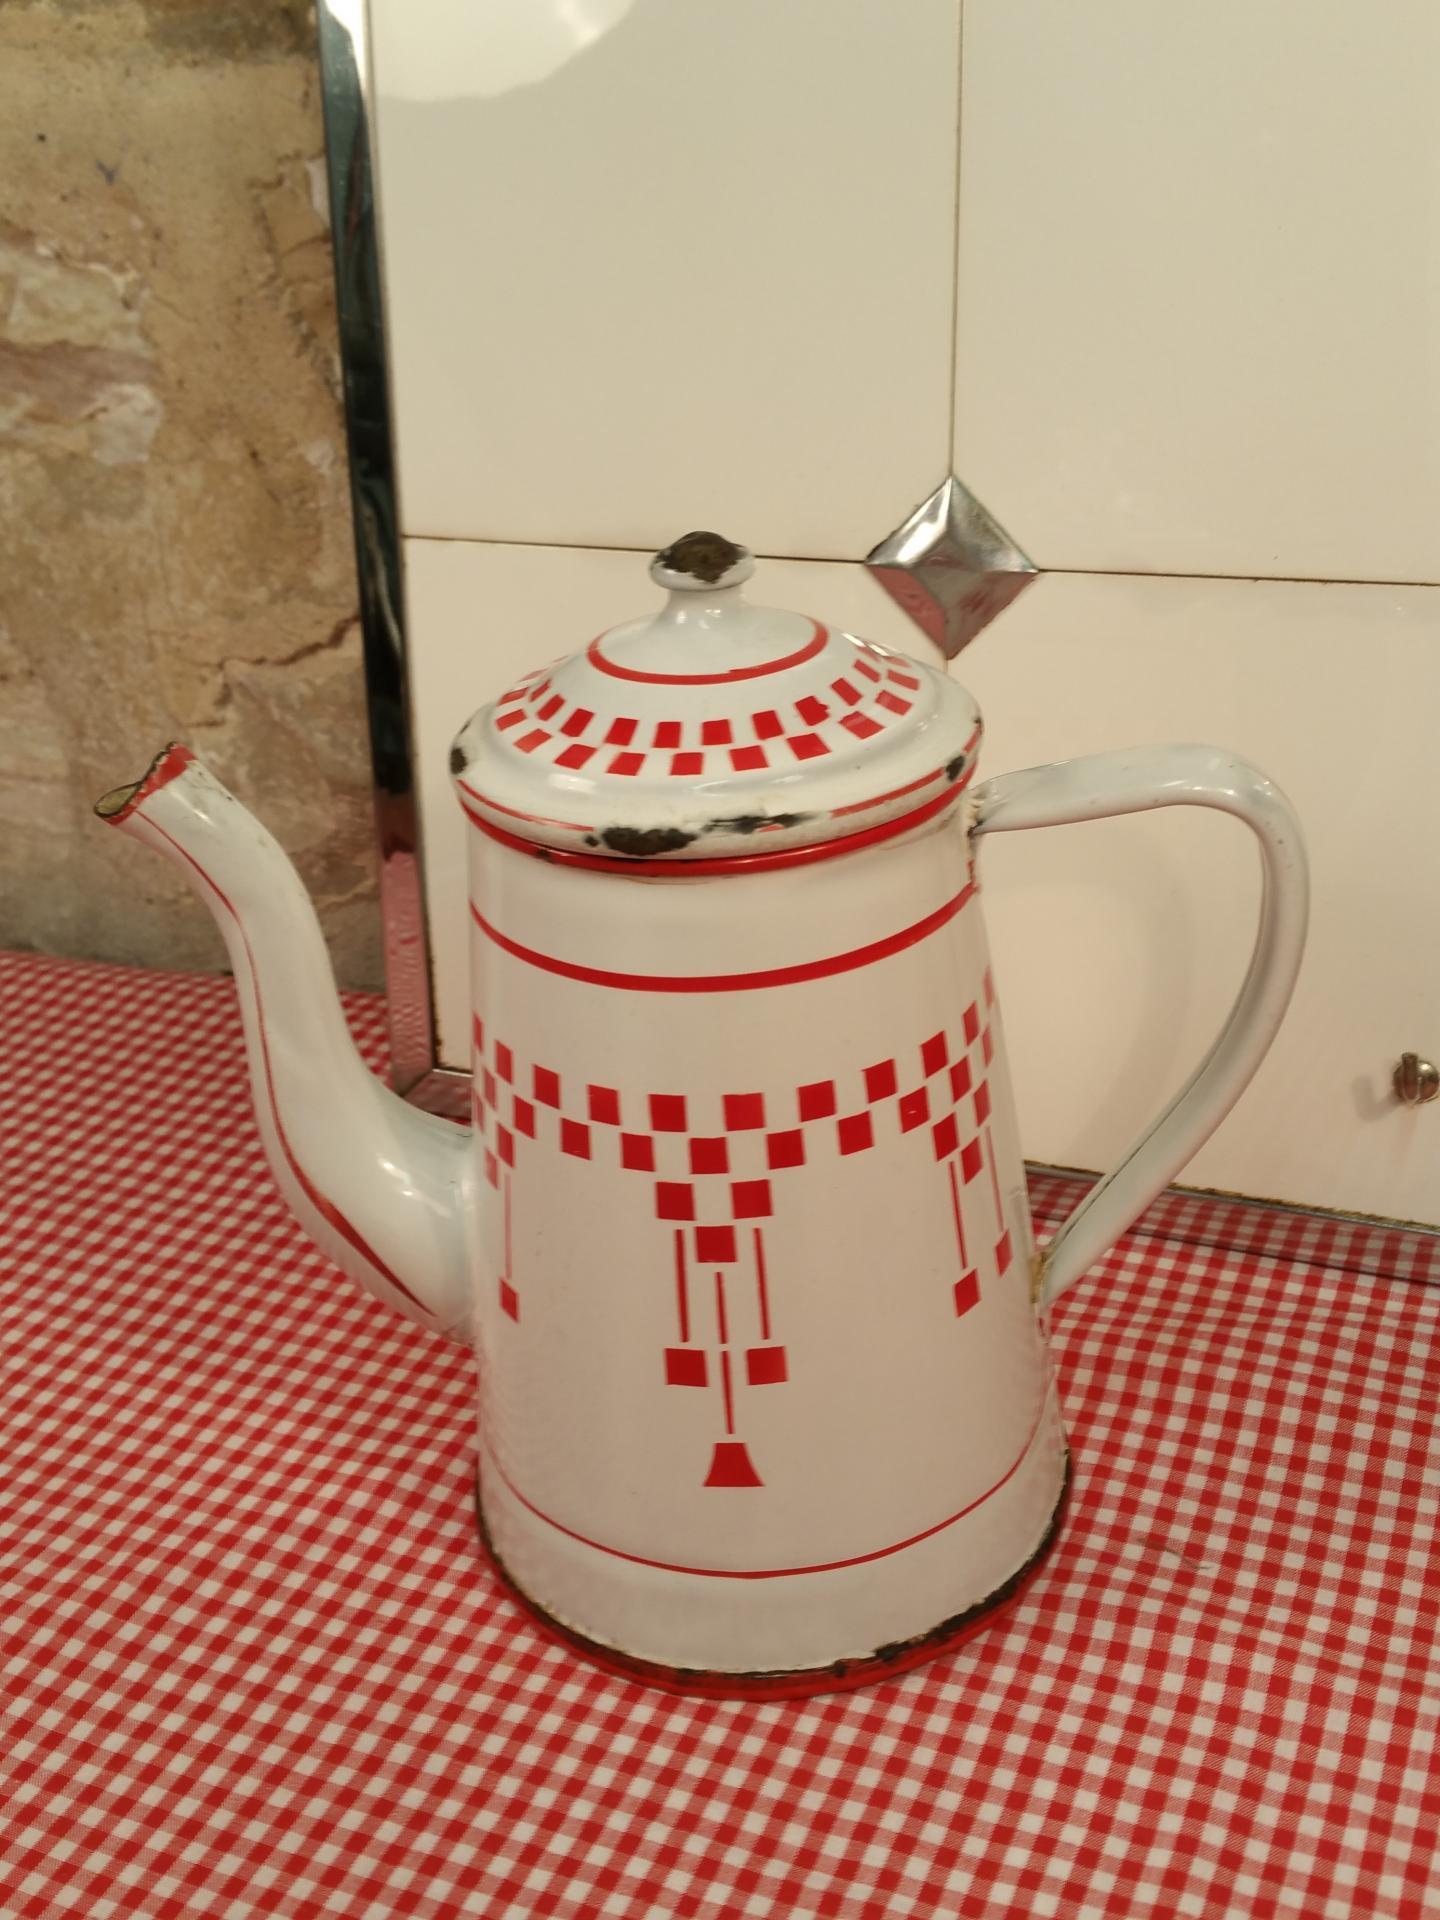 1 cafetiere emaillee blanche et rouge